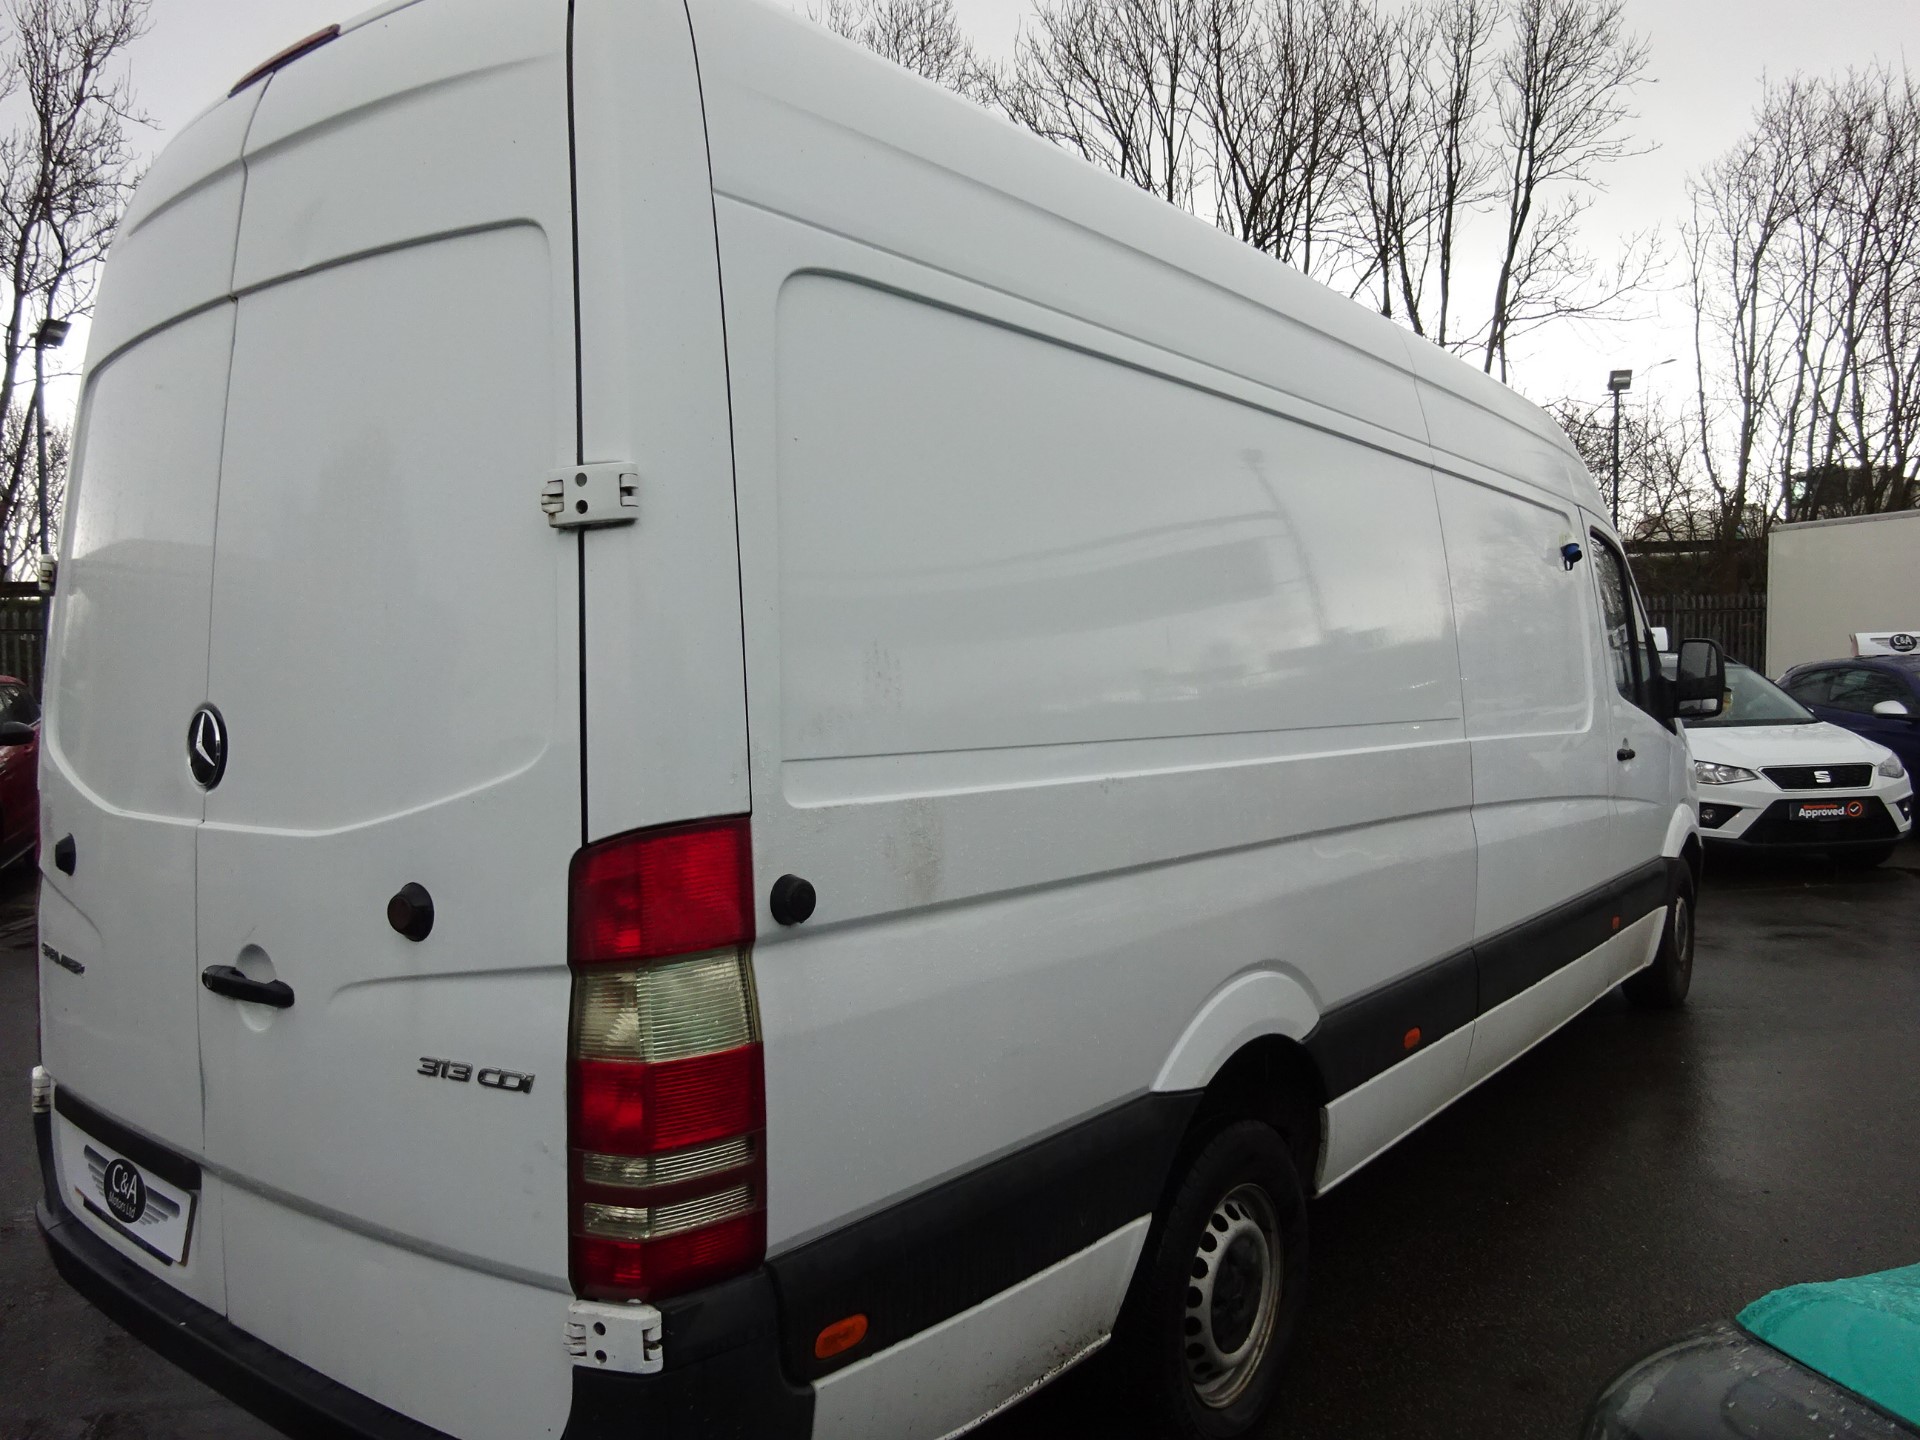 Used Mercedes Sprinter for sale in Rochdale, Lancashire